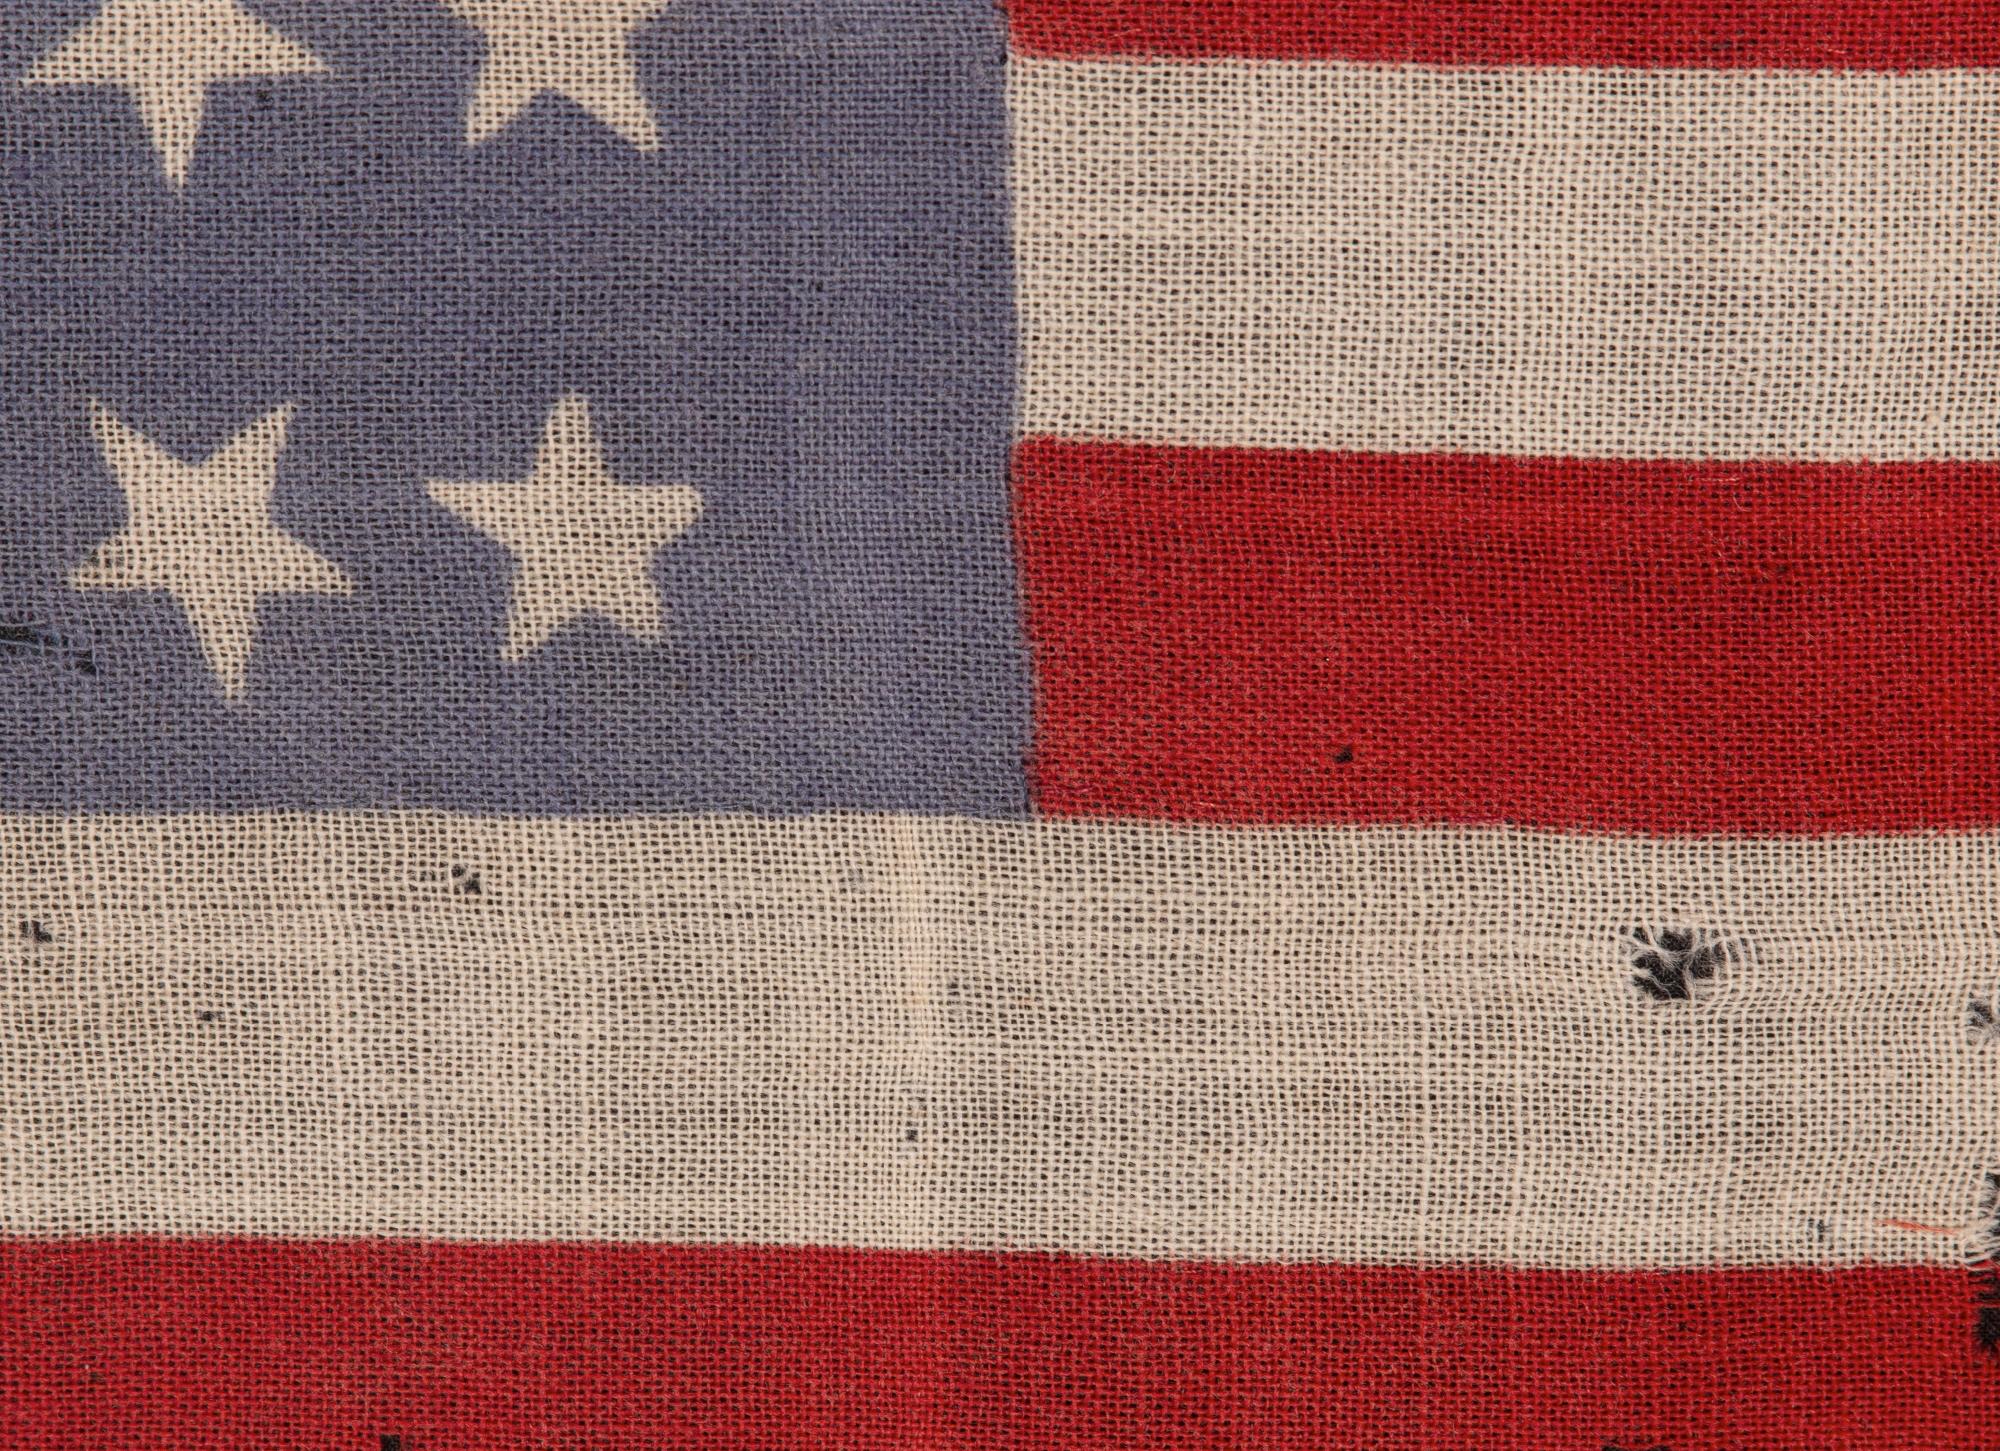 34 TUMBLING STARS on an ANTIQUE AMERICAN FLAG, CIVIL WAR PERIOD, 1861-63, KANSAS In Good Condition For Sale In York County, PA